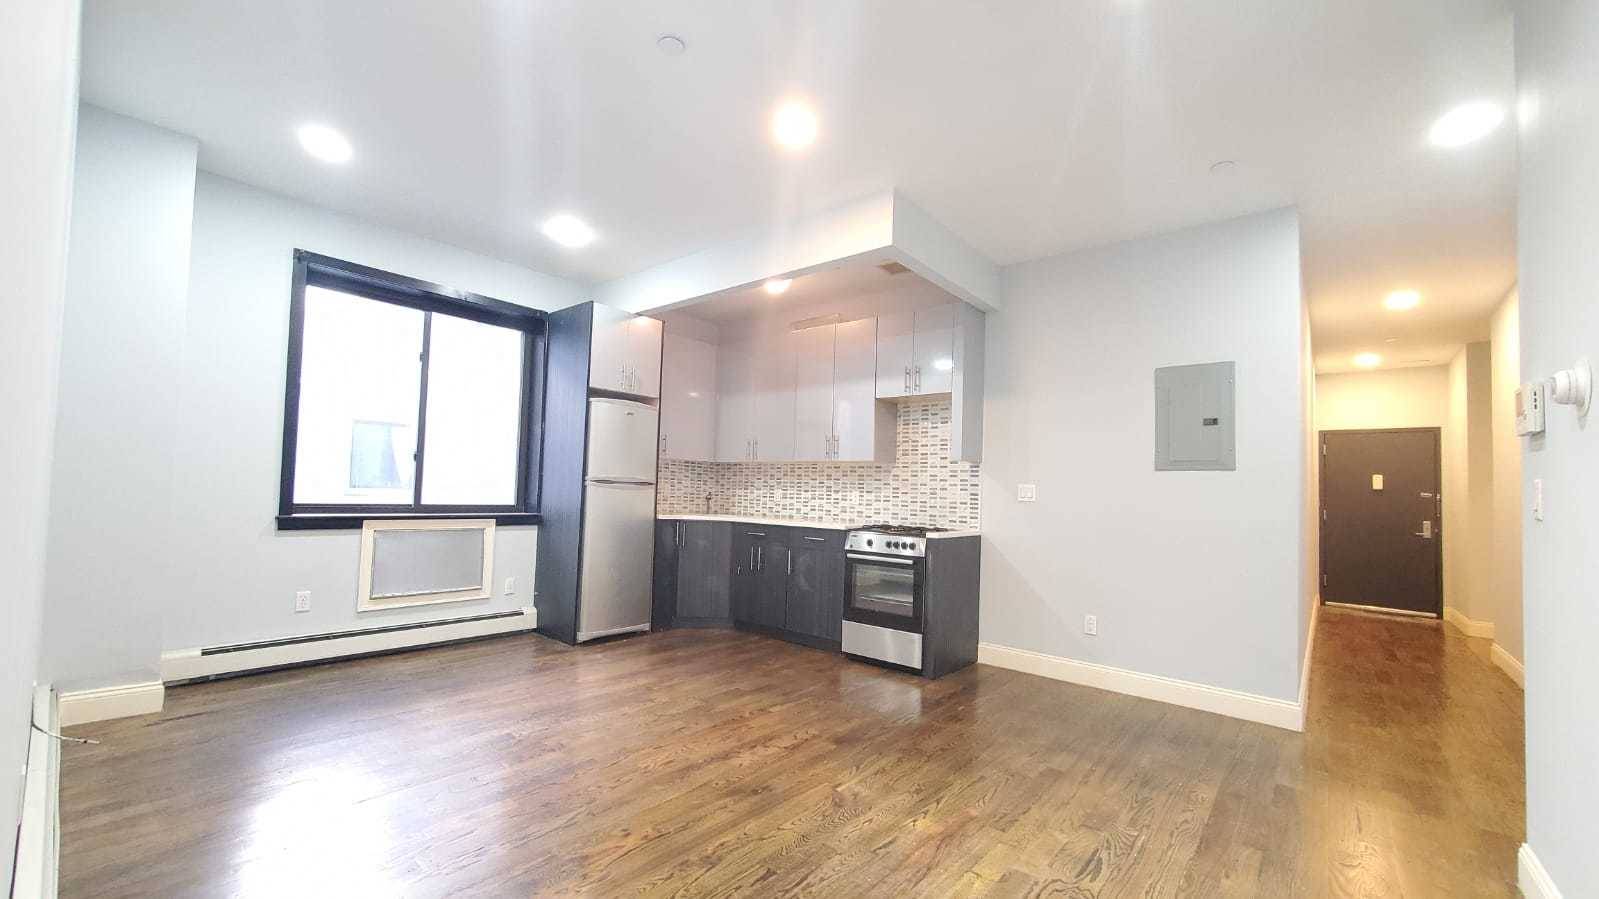 Incredible 3 Bedroom HUGE Apartment with Garage Parking and Laundry.